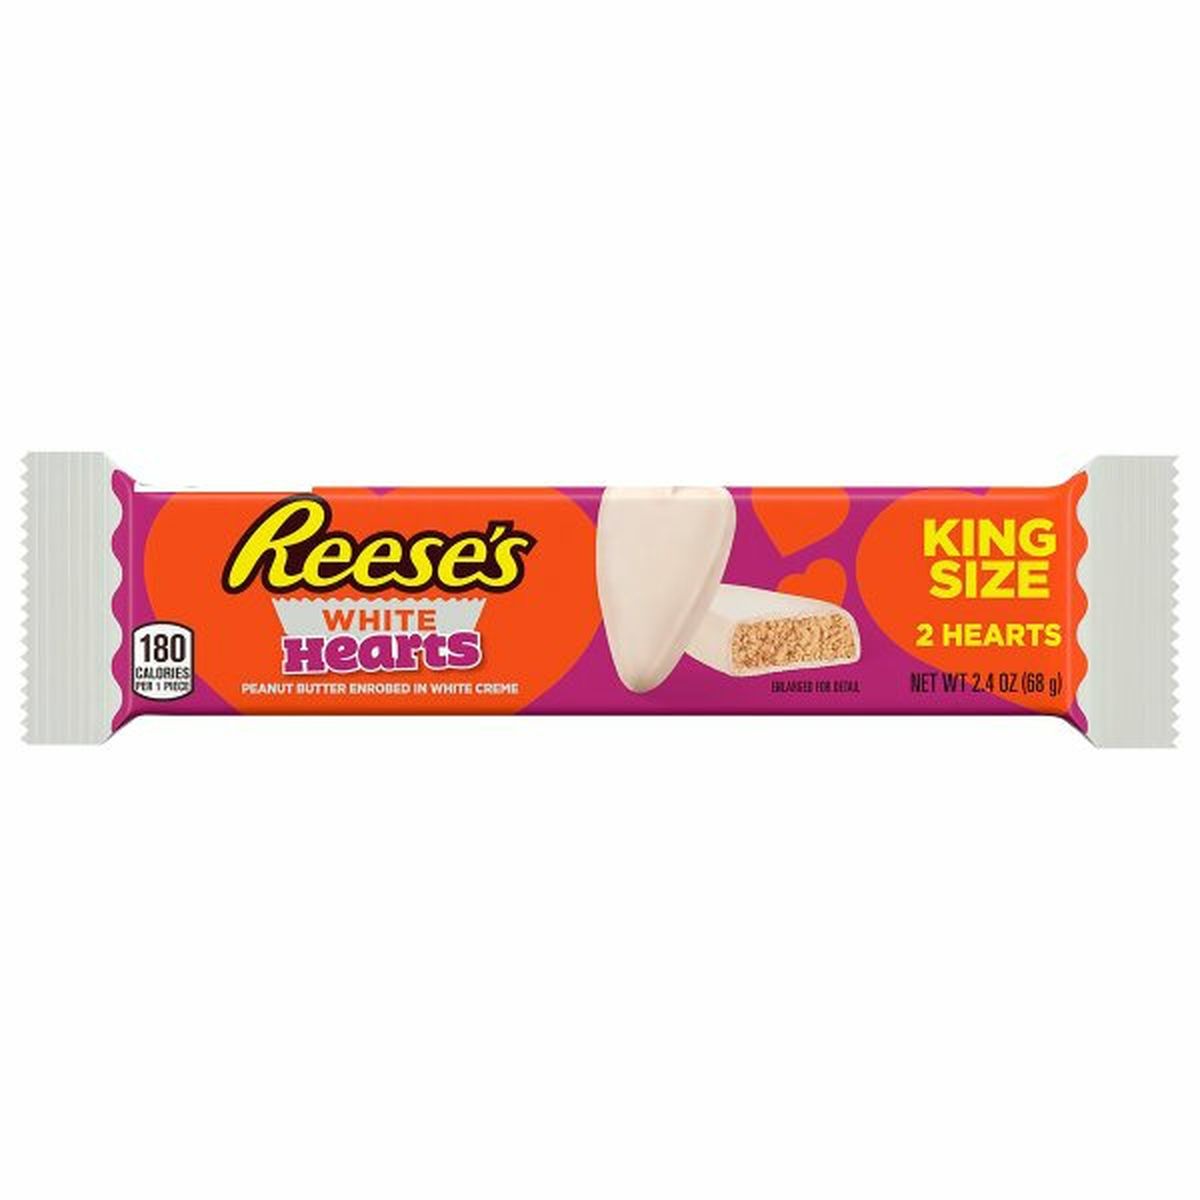 Calories in Reese's White, Hearts, King Size